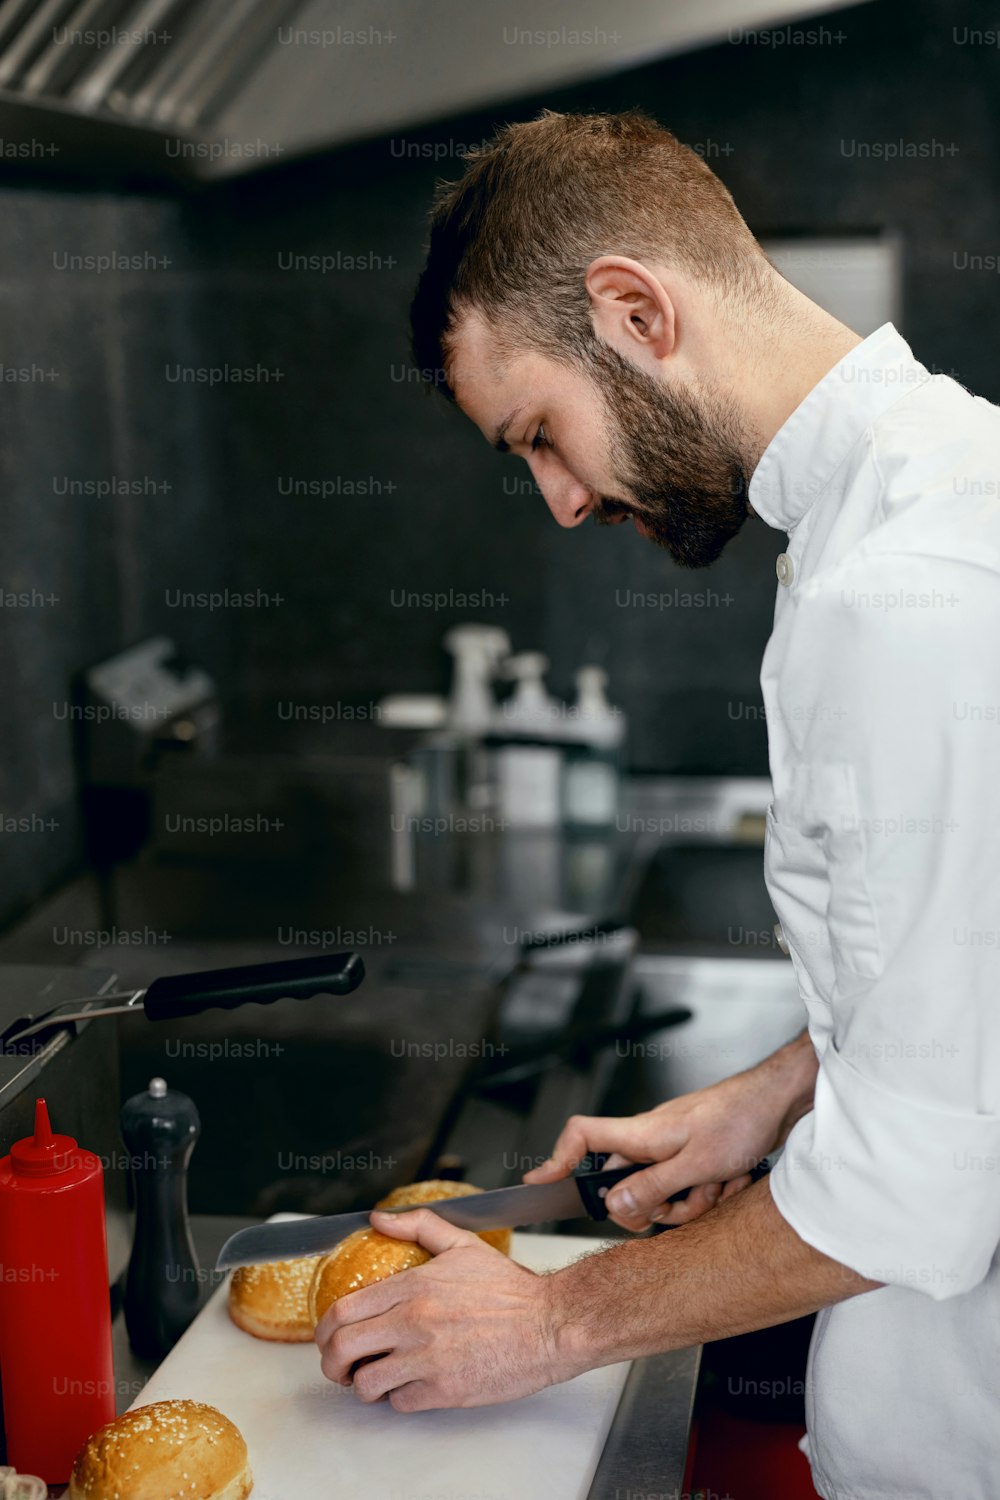 Chef Cooking Burgers In Restaurant Kitchen, Cutting Buns. High Resolution.